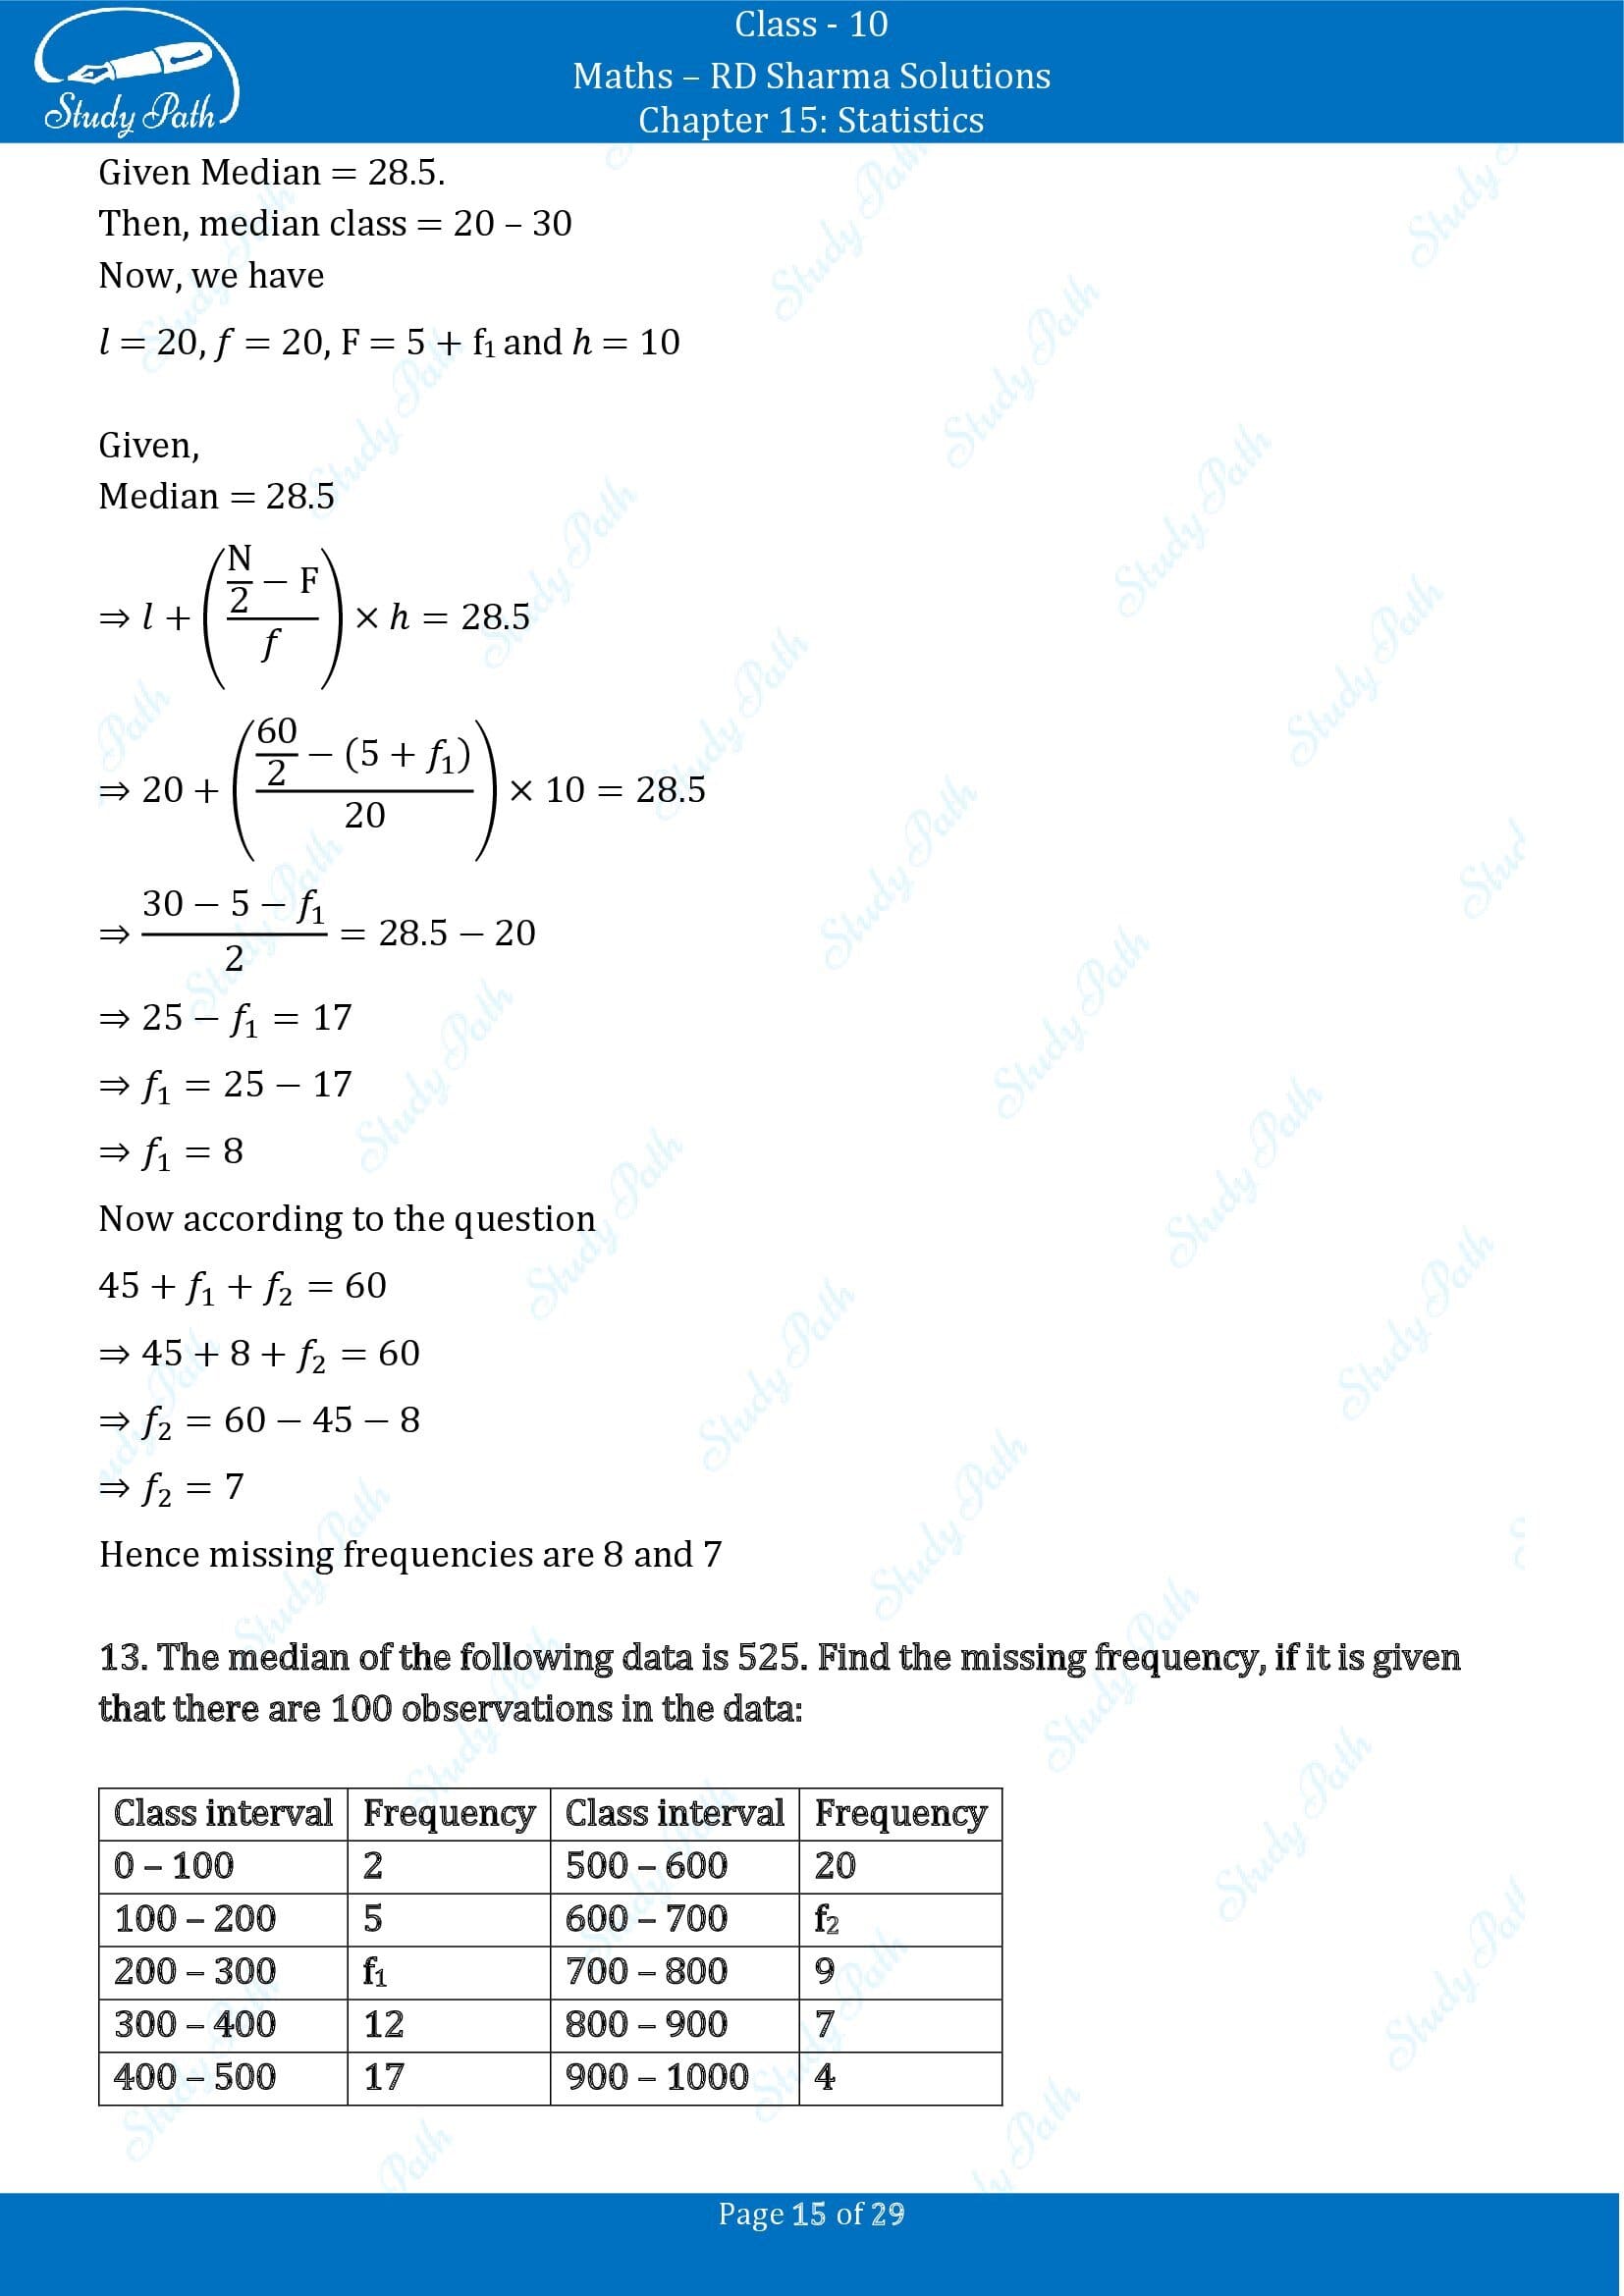 RD Sharma Solutions Class 10 Chapter 15 Statistics Exercise 15.4 00015